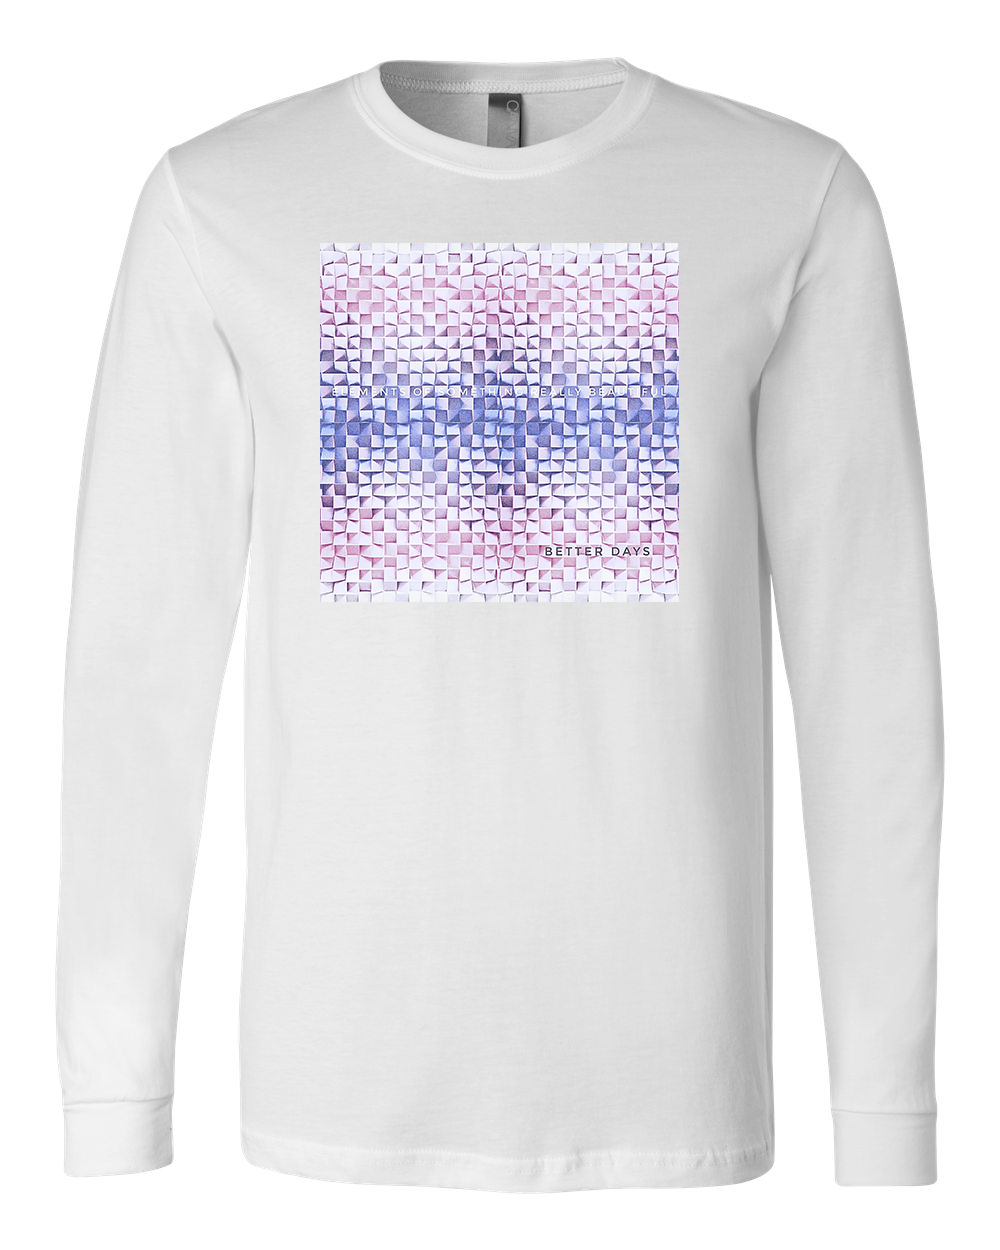 Elements of Something Really Beautiful : Better Days Long Sleeve